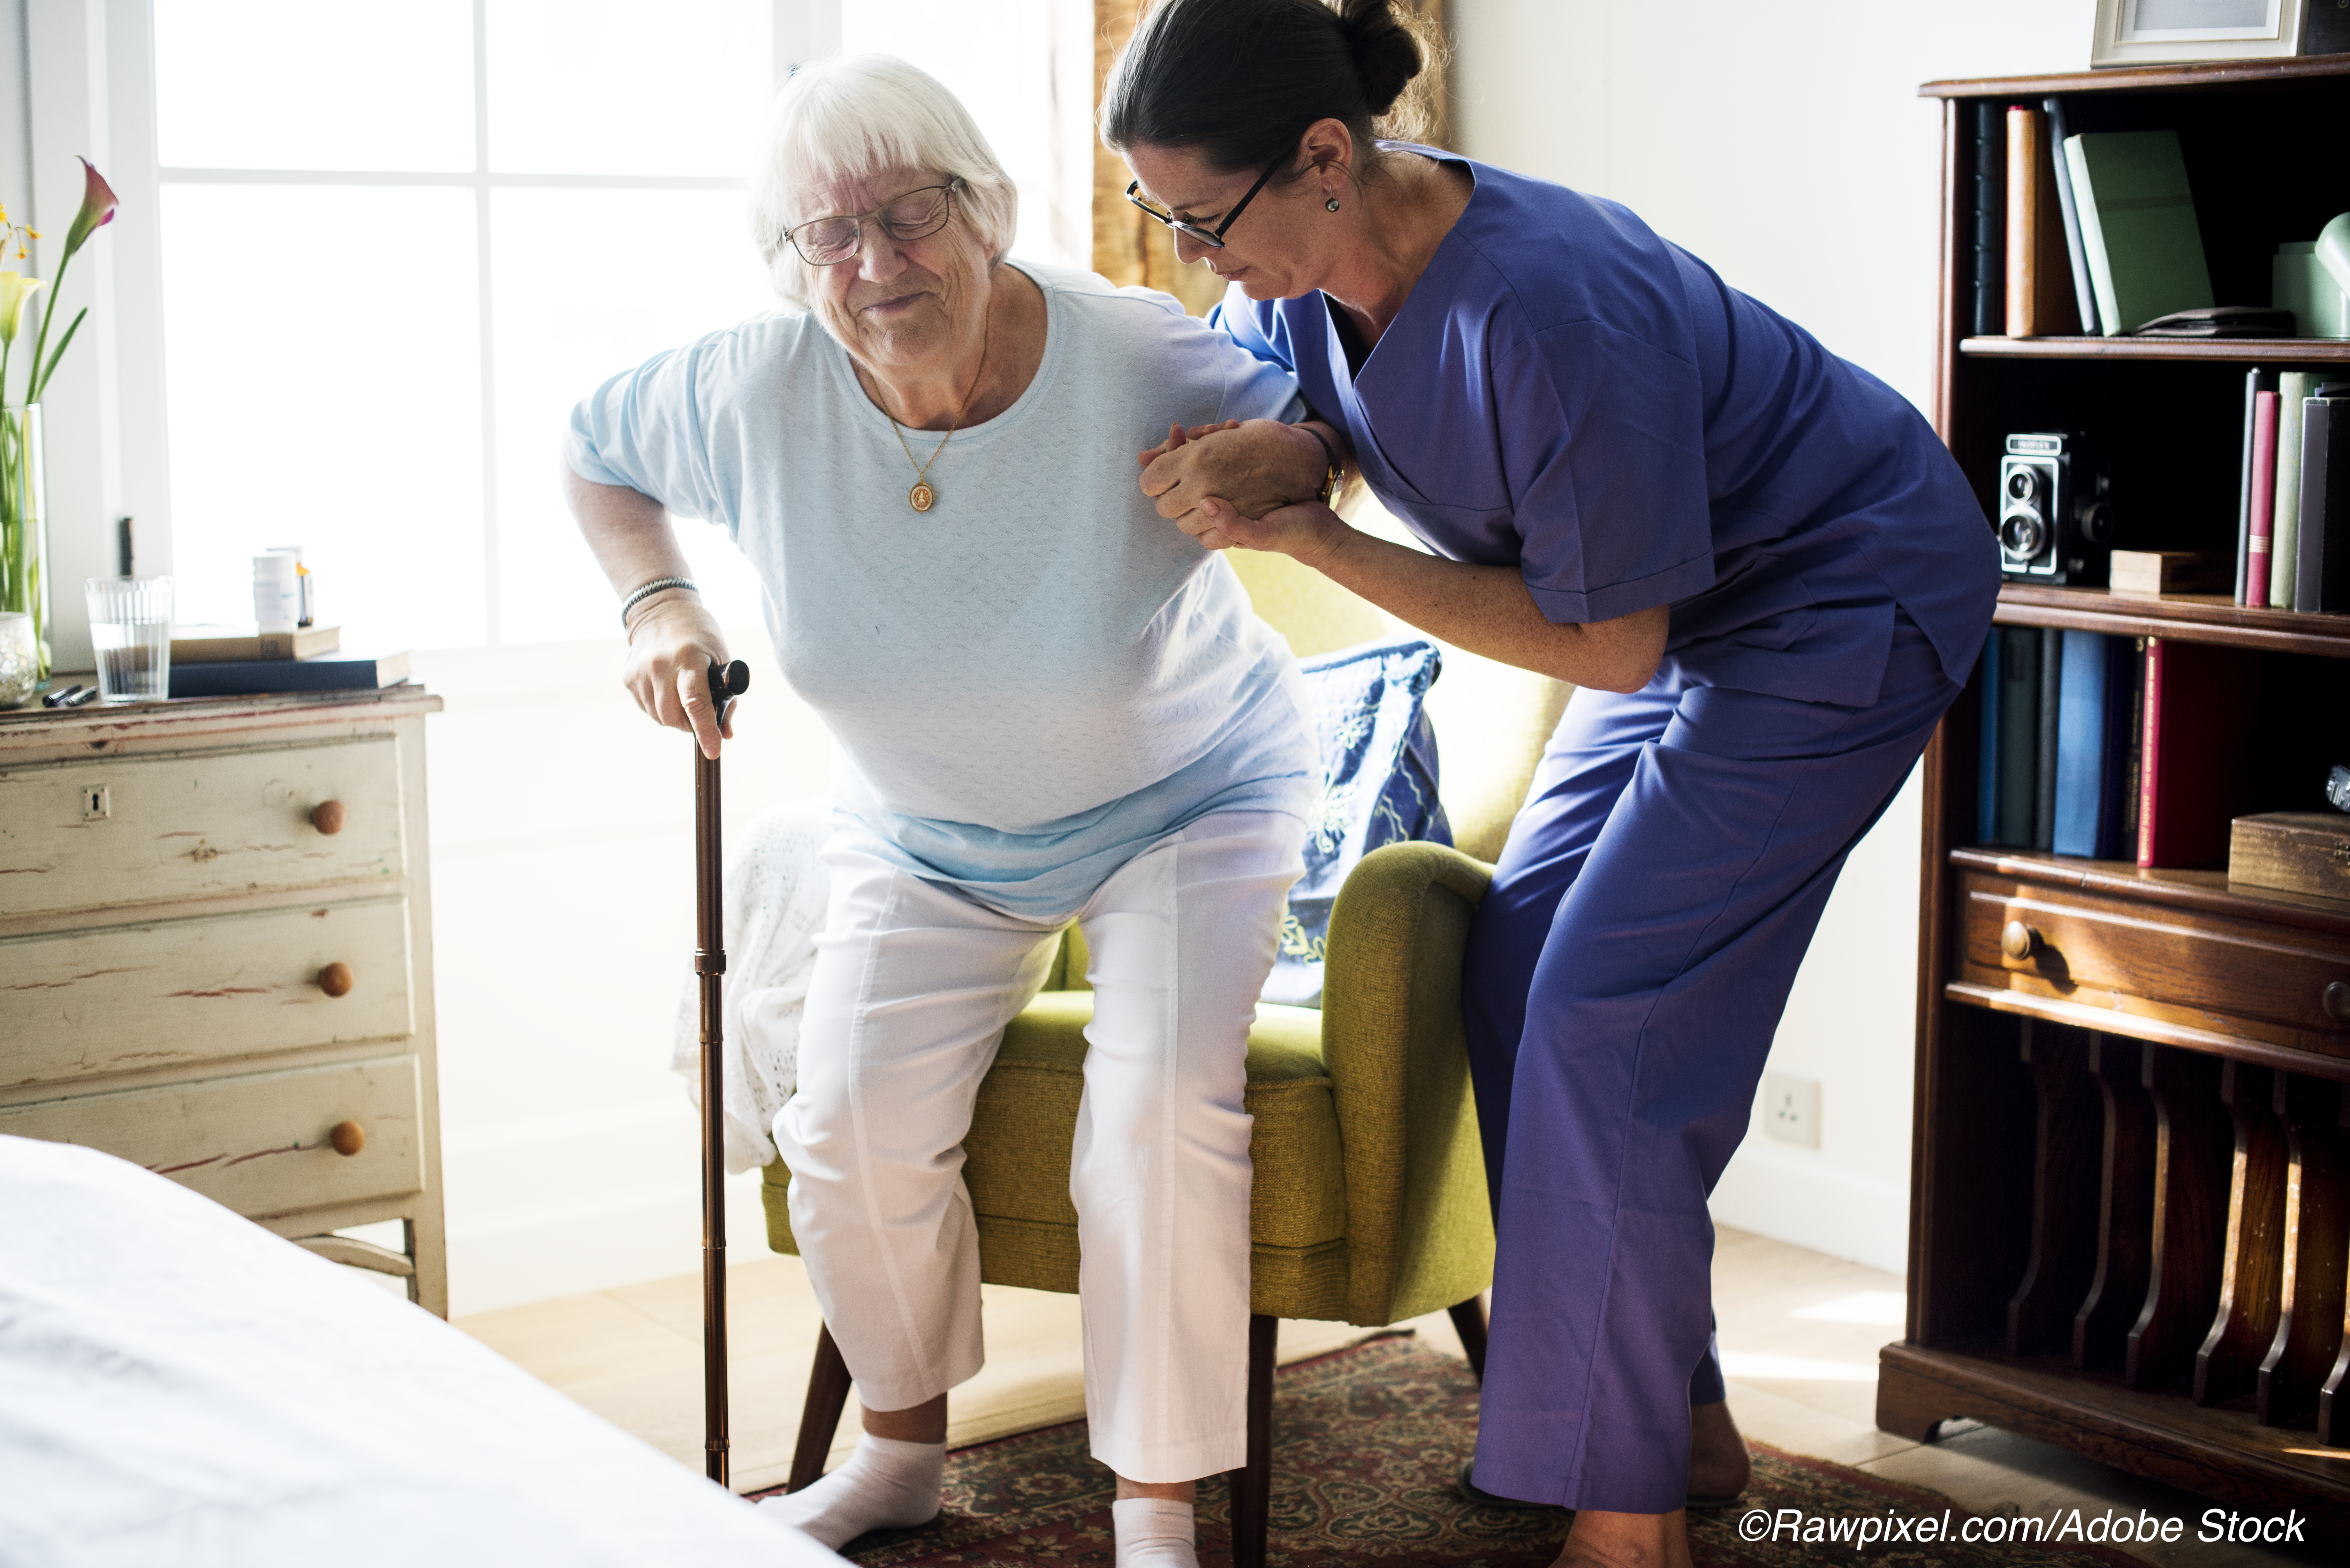 At-Home Care Matches In-Hospital Care in Older Adults
